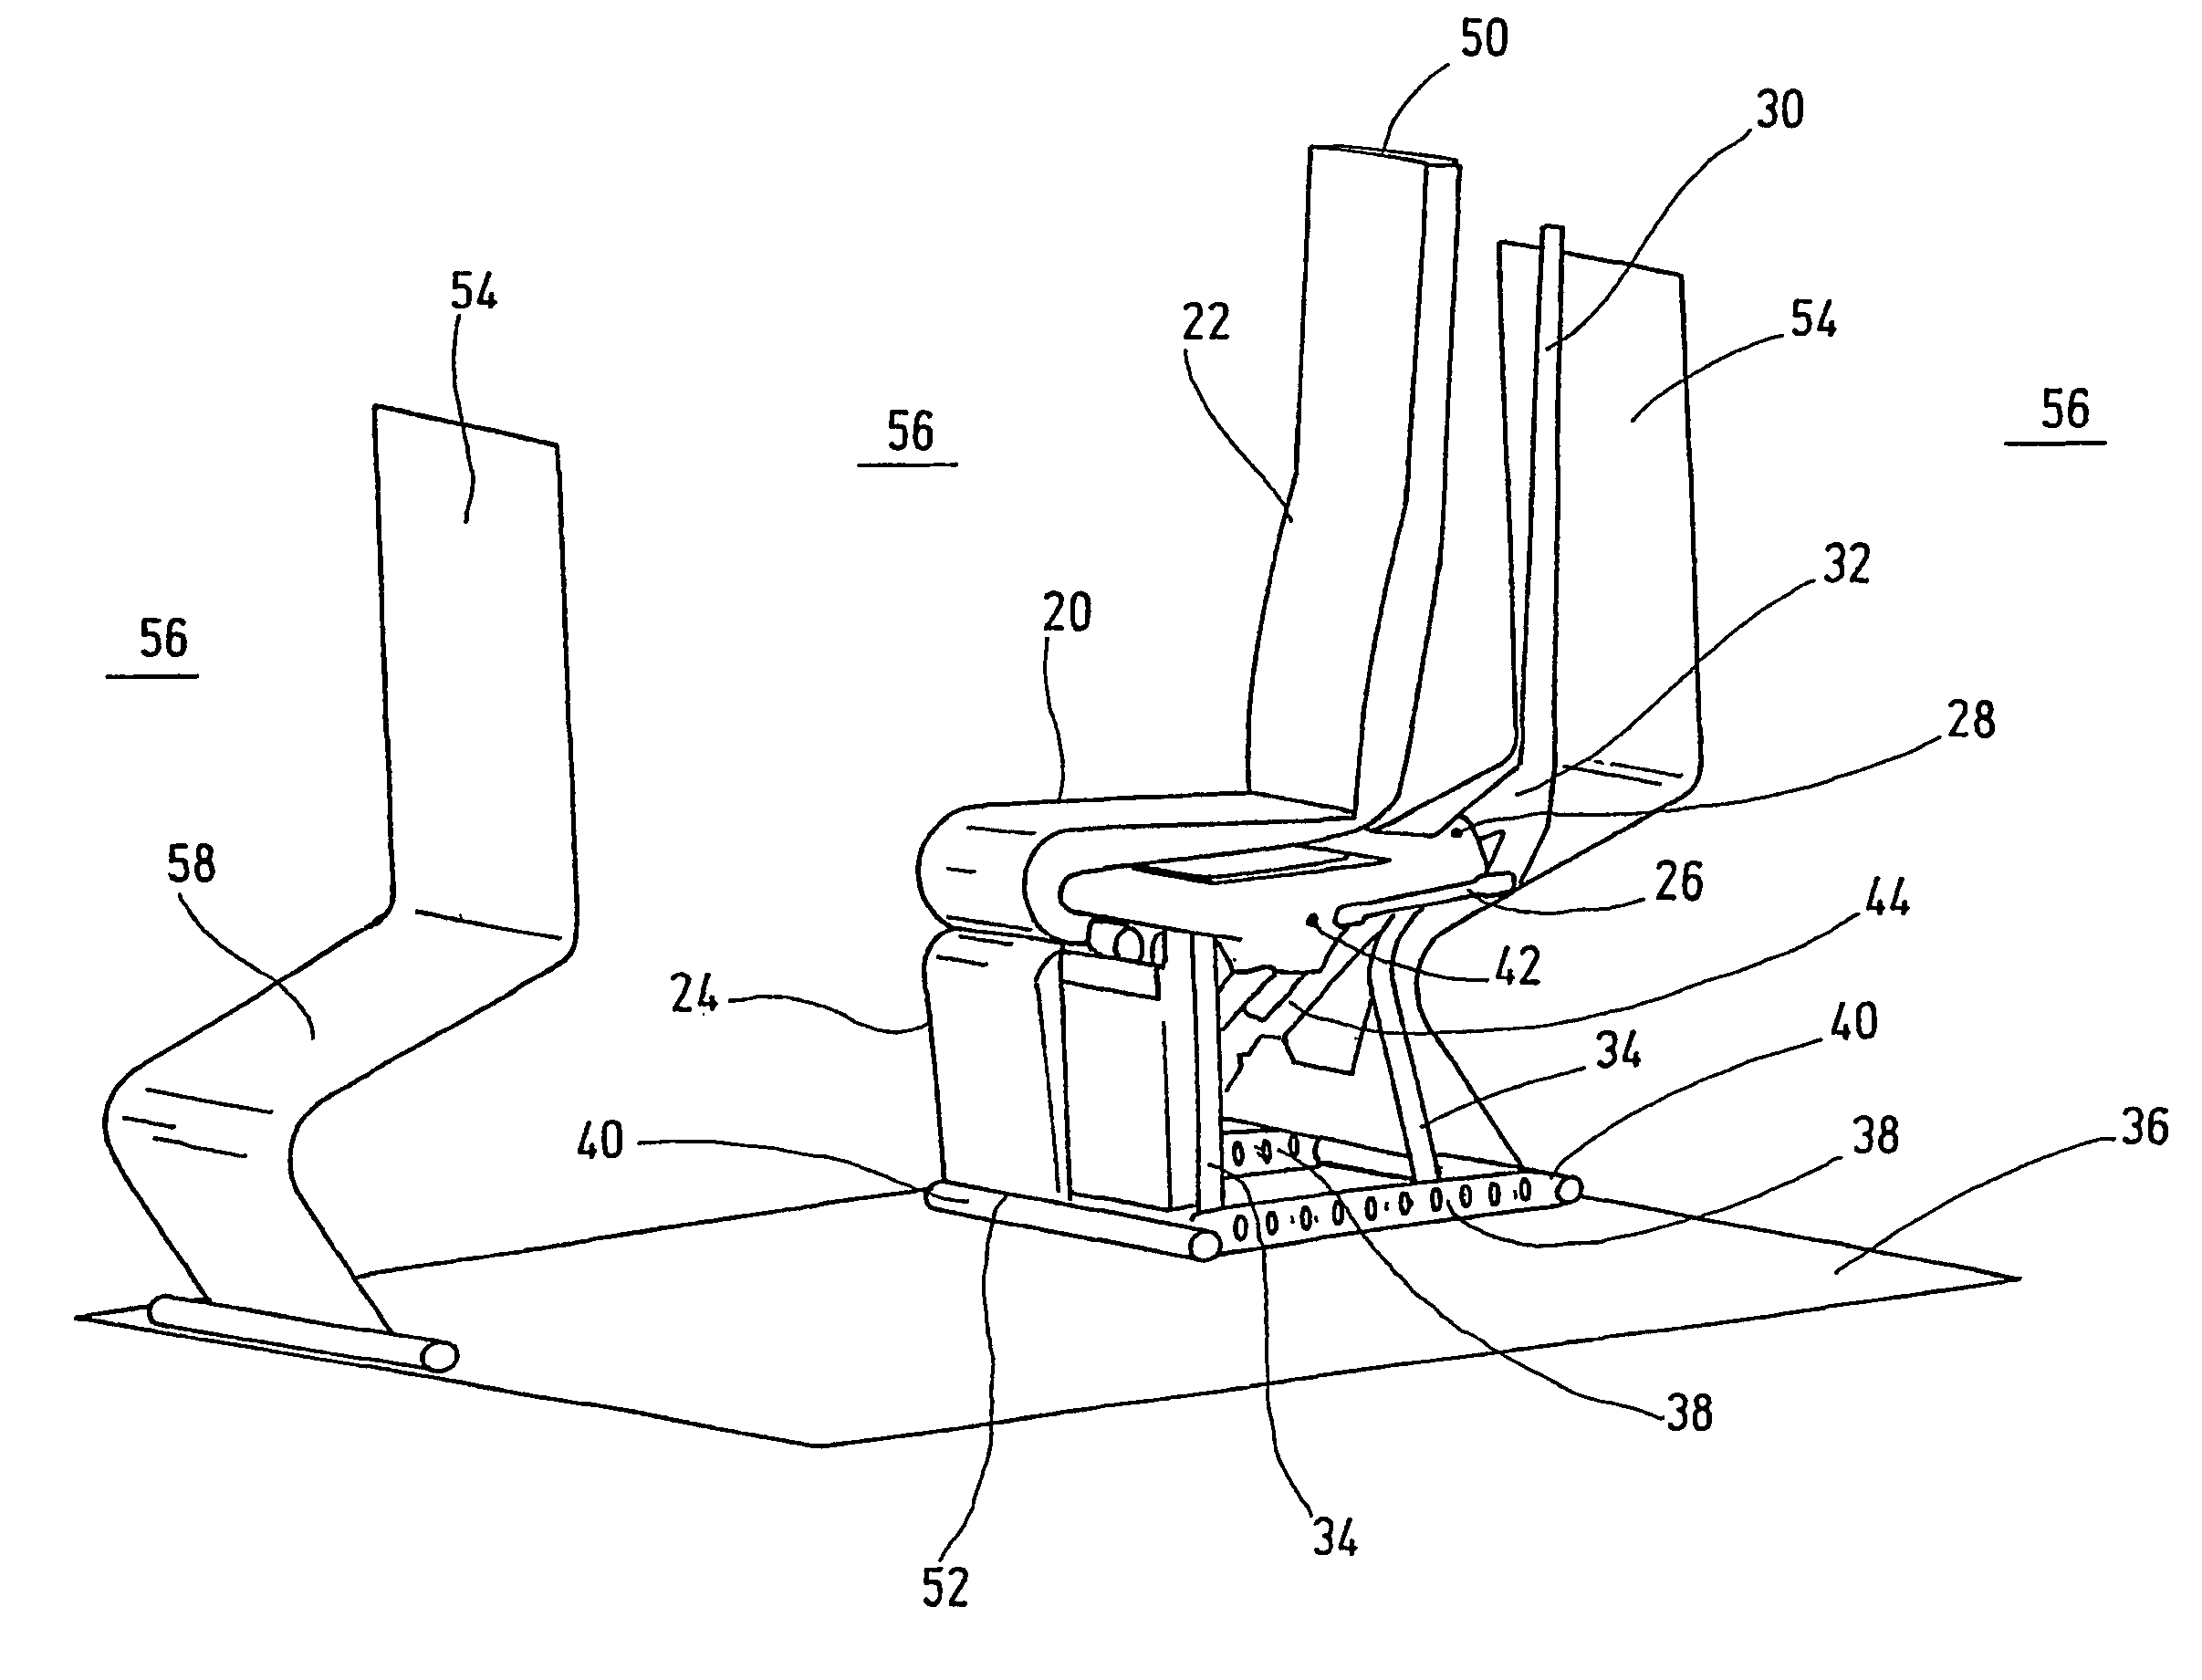 Vehicle seat with seating components adjustable within a spatial constraint